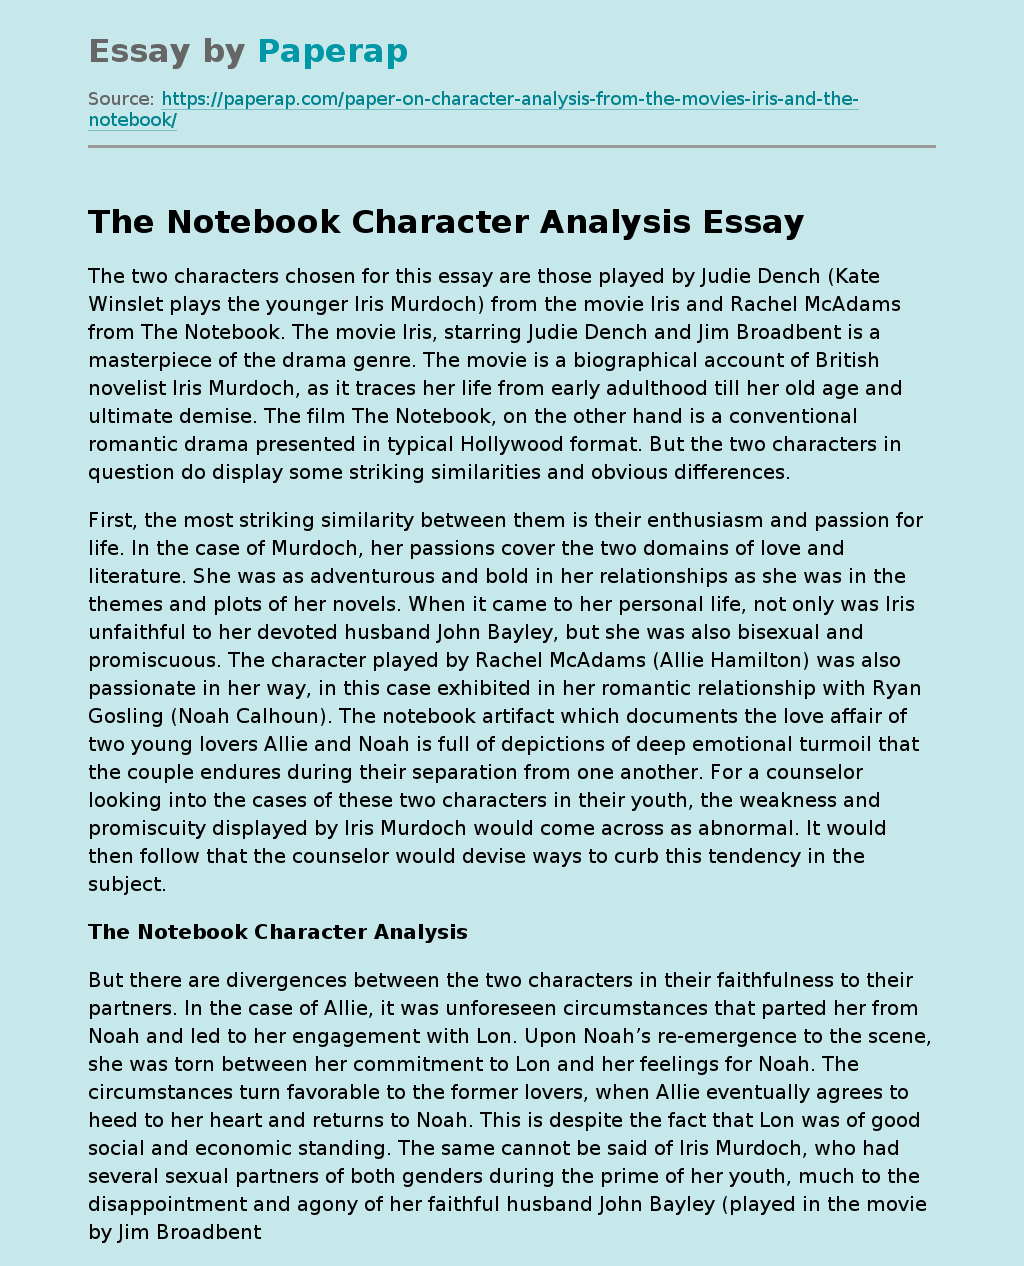 The Notebook Character Analysis